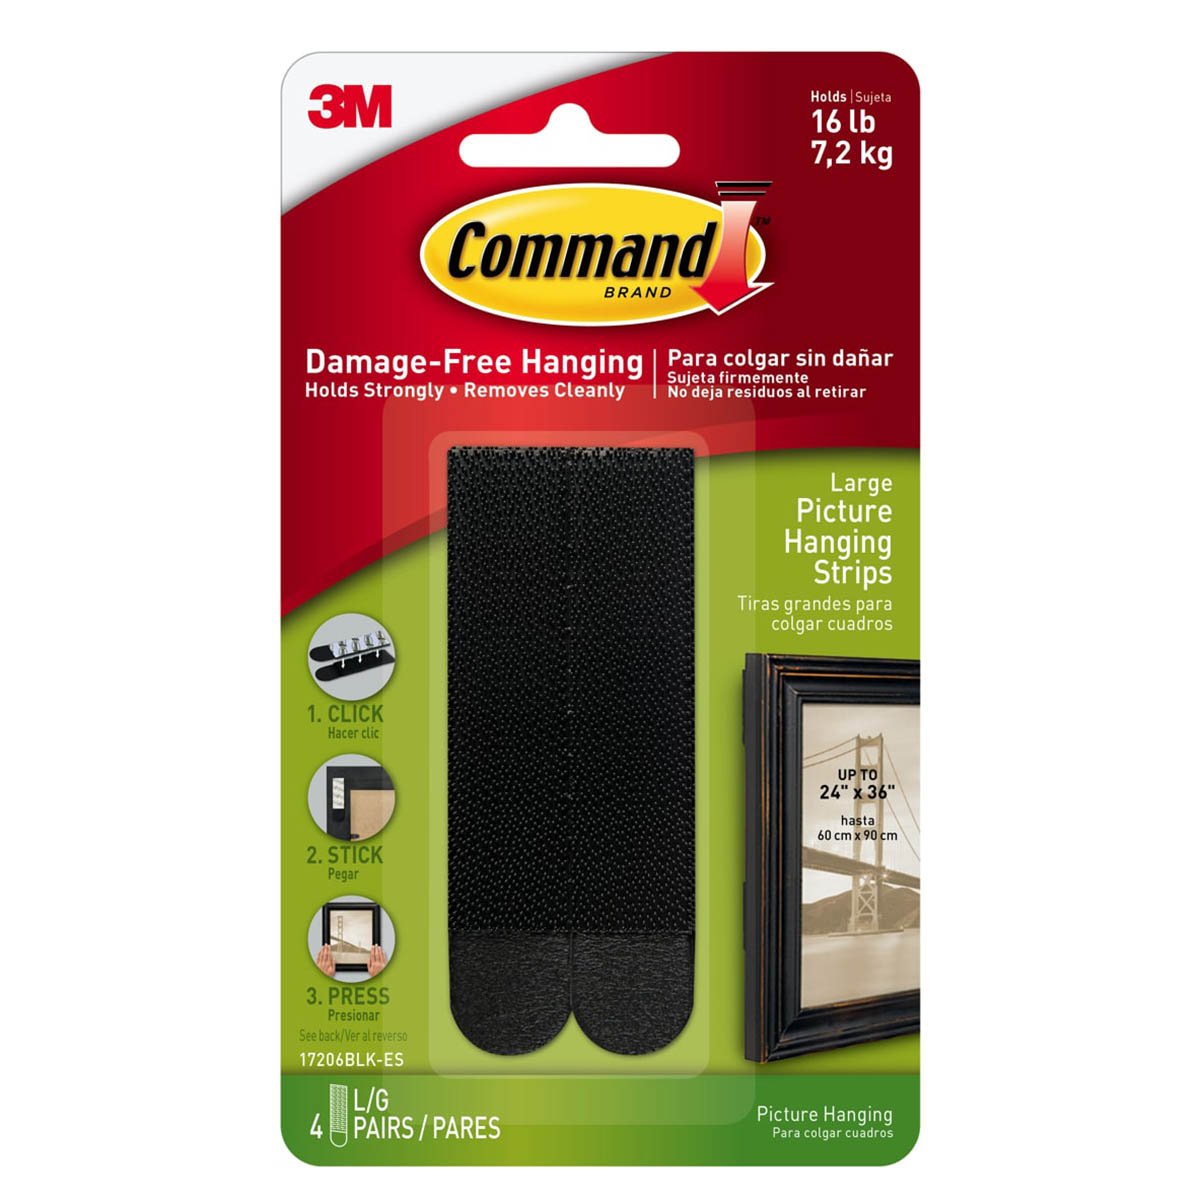 3M Command Large Picture Hanging Strips (Black) 4 Sets of Strips/1.8 Kg per Set